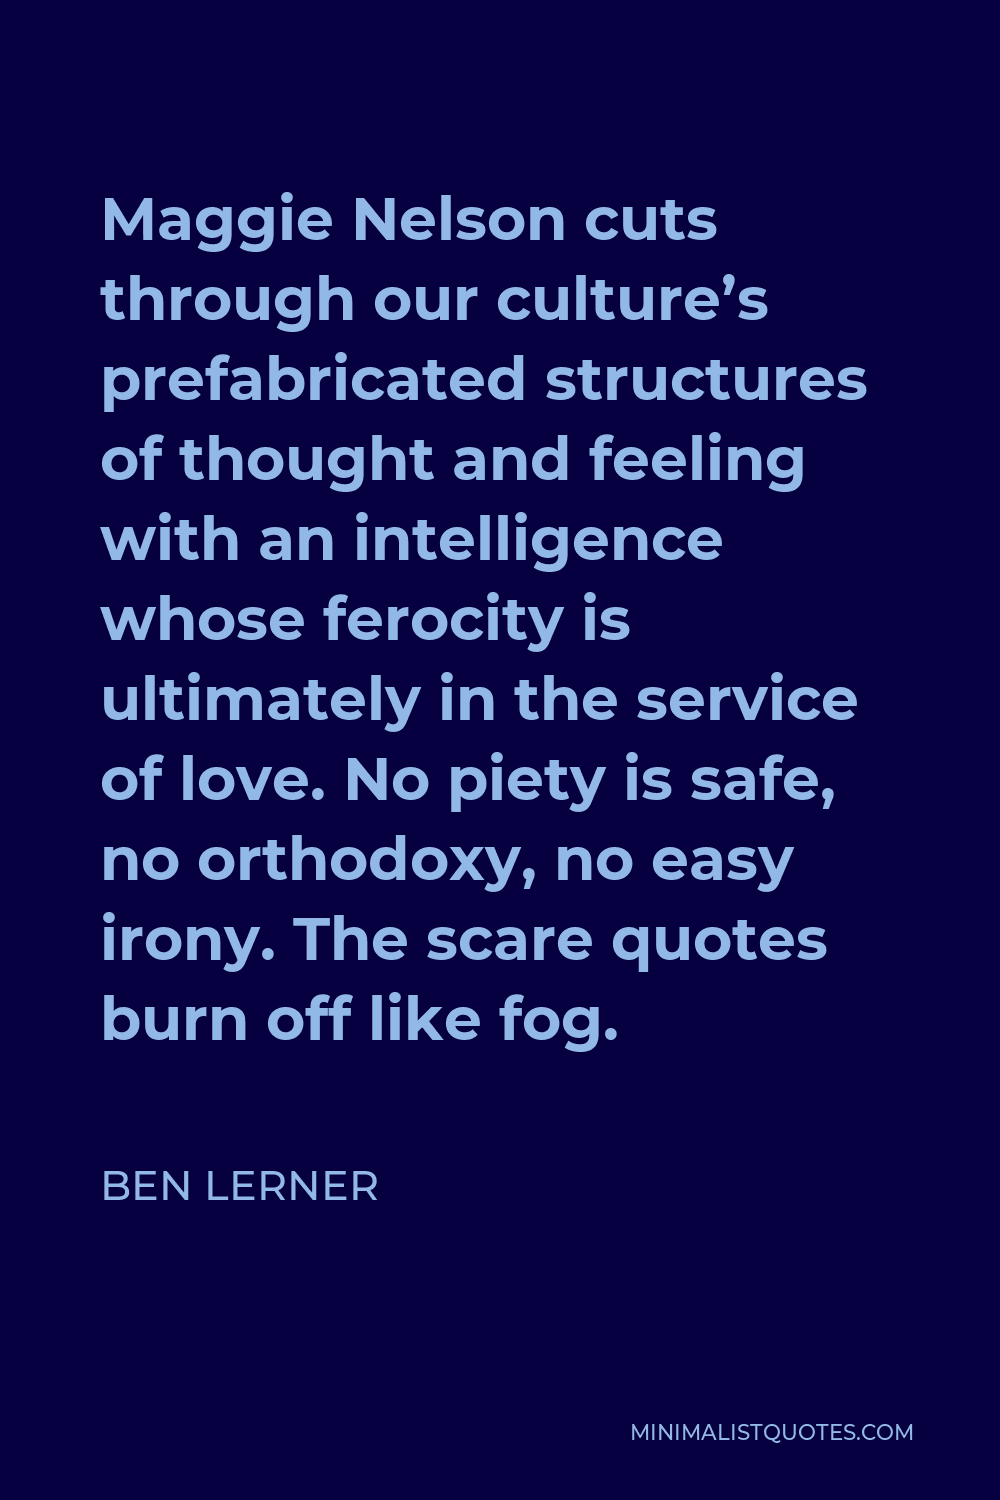 Ben Lerner Quote - Maggie Nelson cuts through our culture’s prefabricated structures of thought and feeling with an intelligence whose ferocity is ultimately in the service of love. No piety is safe, no orthodoxy, no easy irony. The scare quotes burn off like fog.